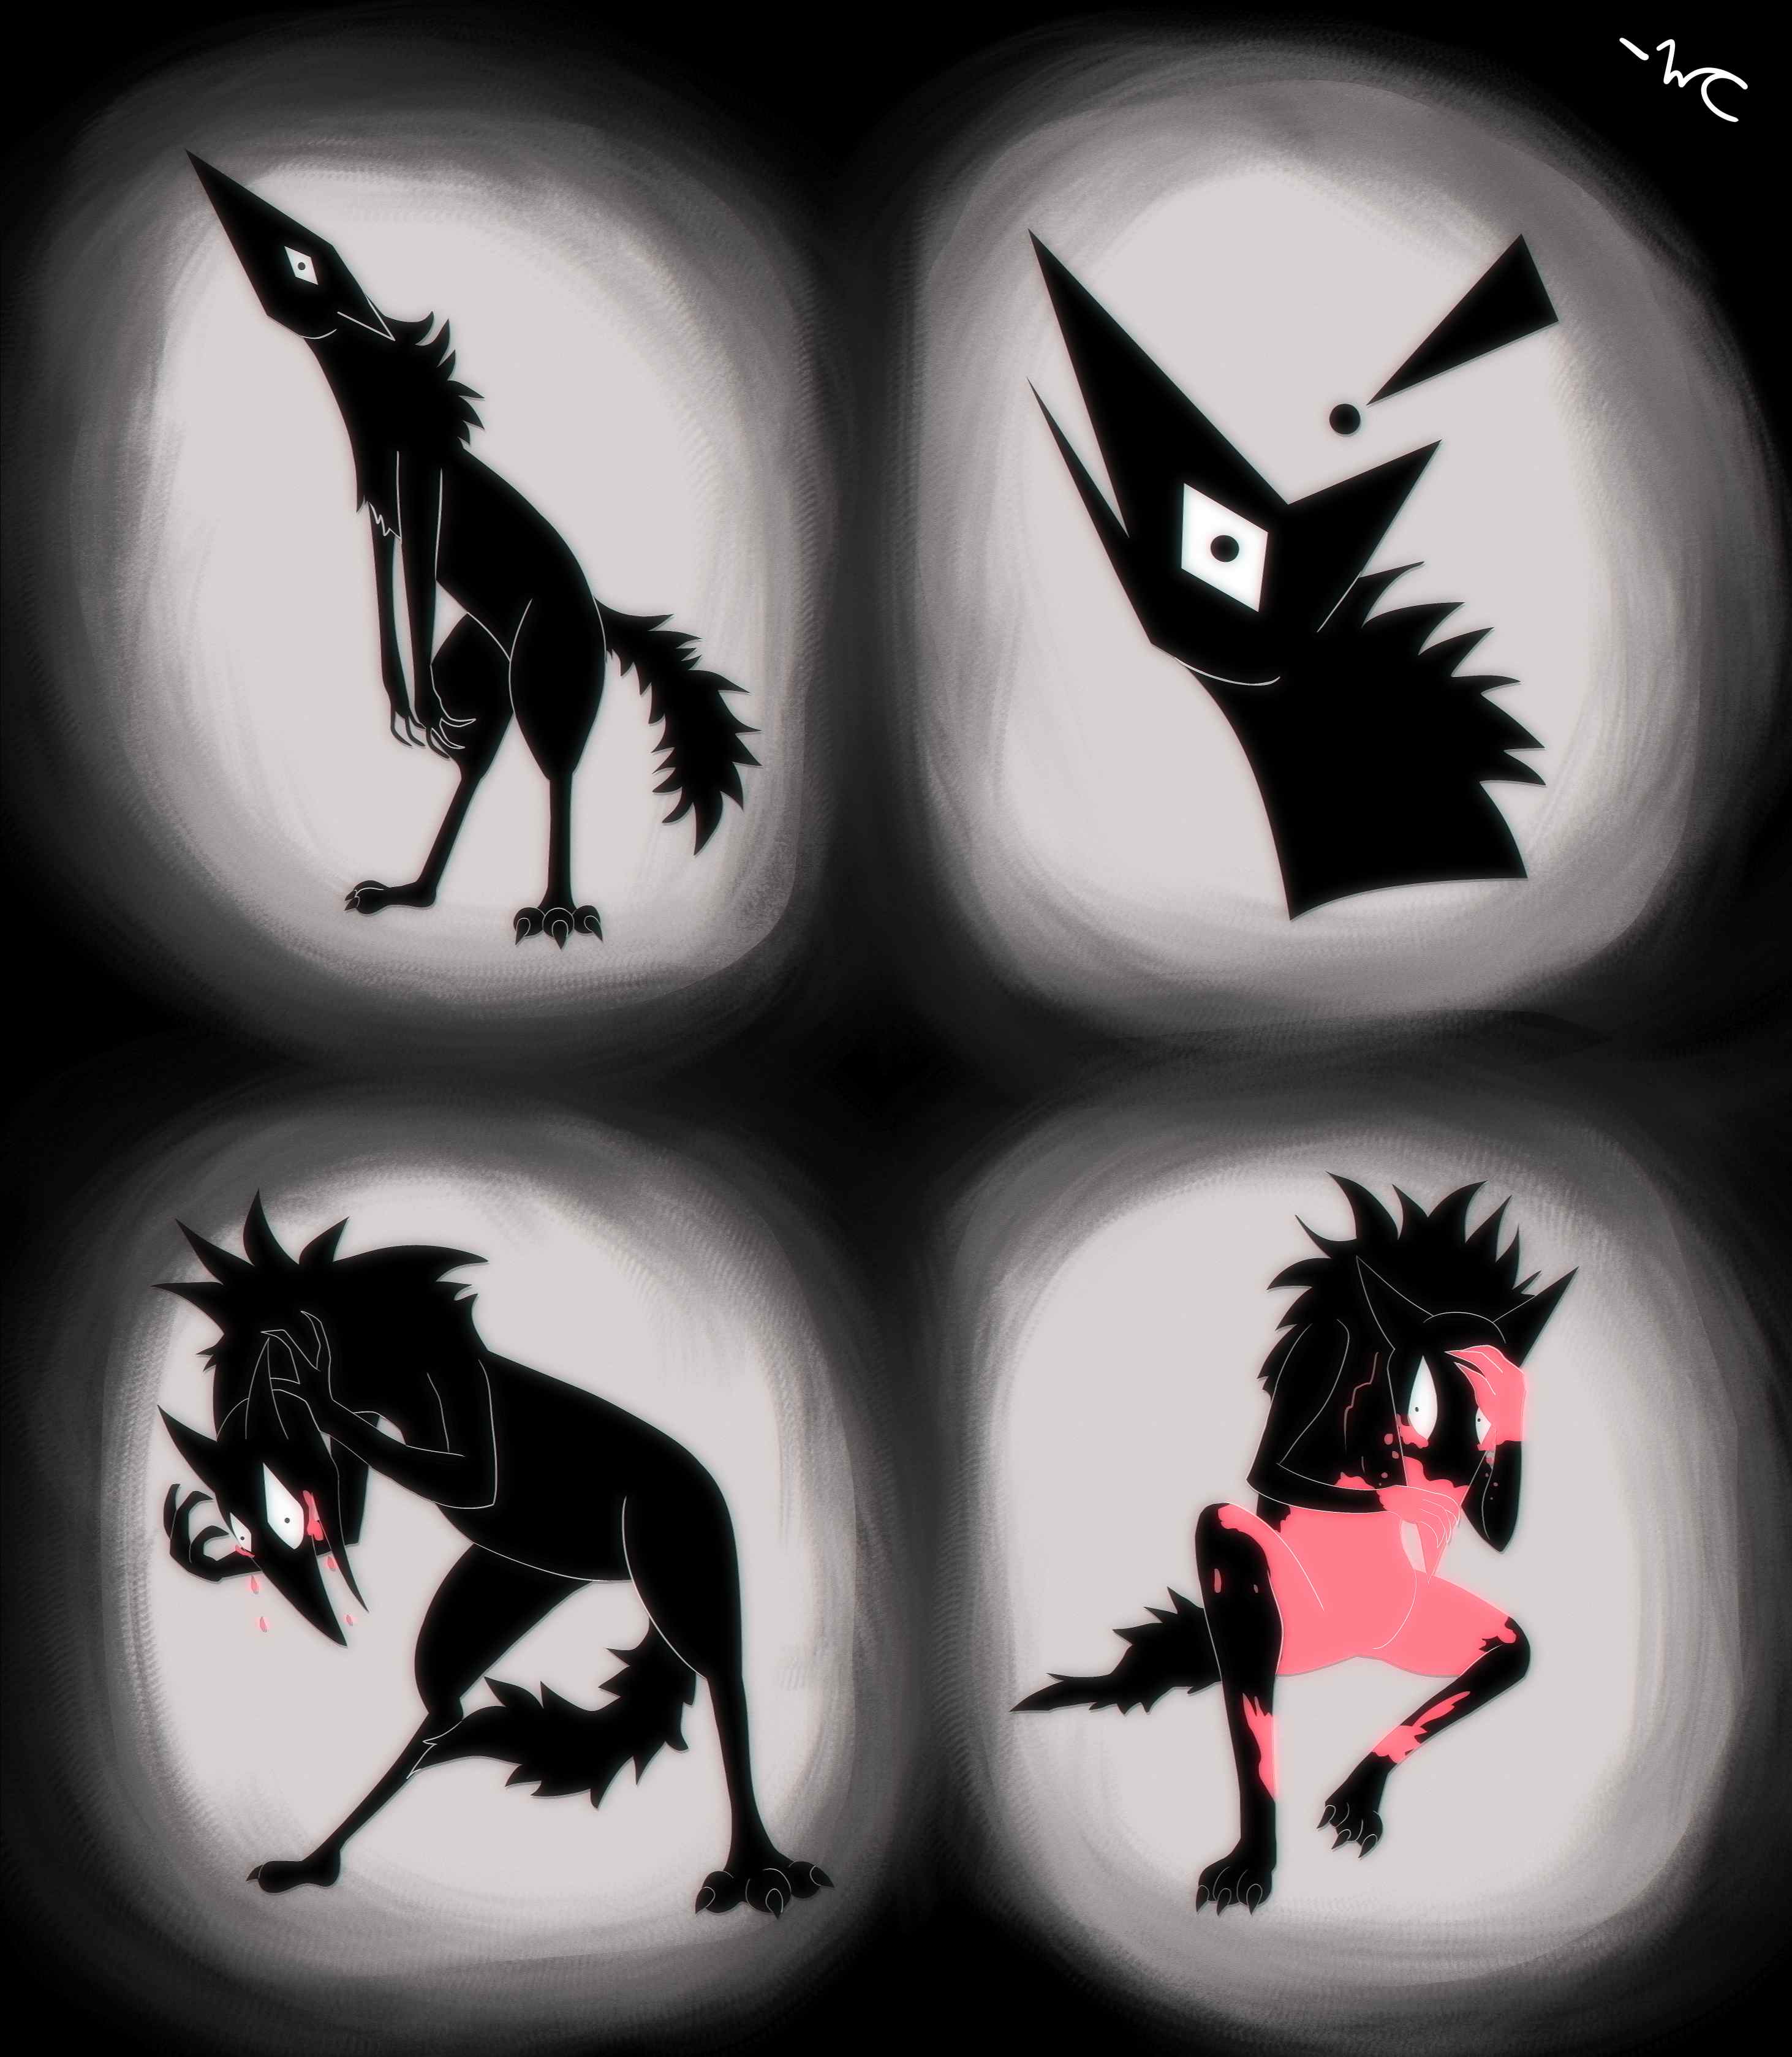 Four panels containing a silhouette of a werewolf-like cartoon creature. In the first panel, it's standing and looking up. In the second, it's just its head; a look of surprise with an exclamation point. In the third, the creature is crying and grasping at its head. In the final panel we see it sat on the ground, still crying, with blood over its body. 